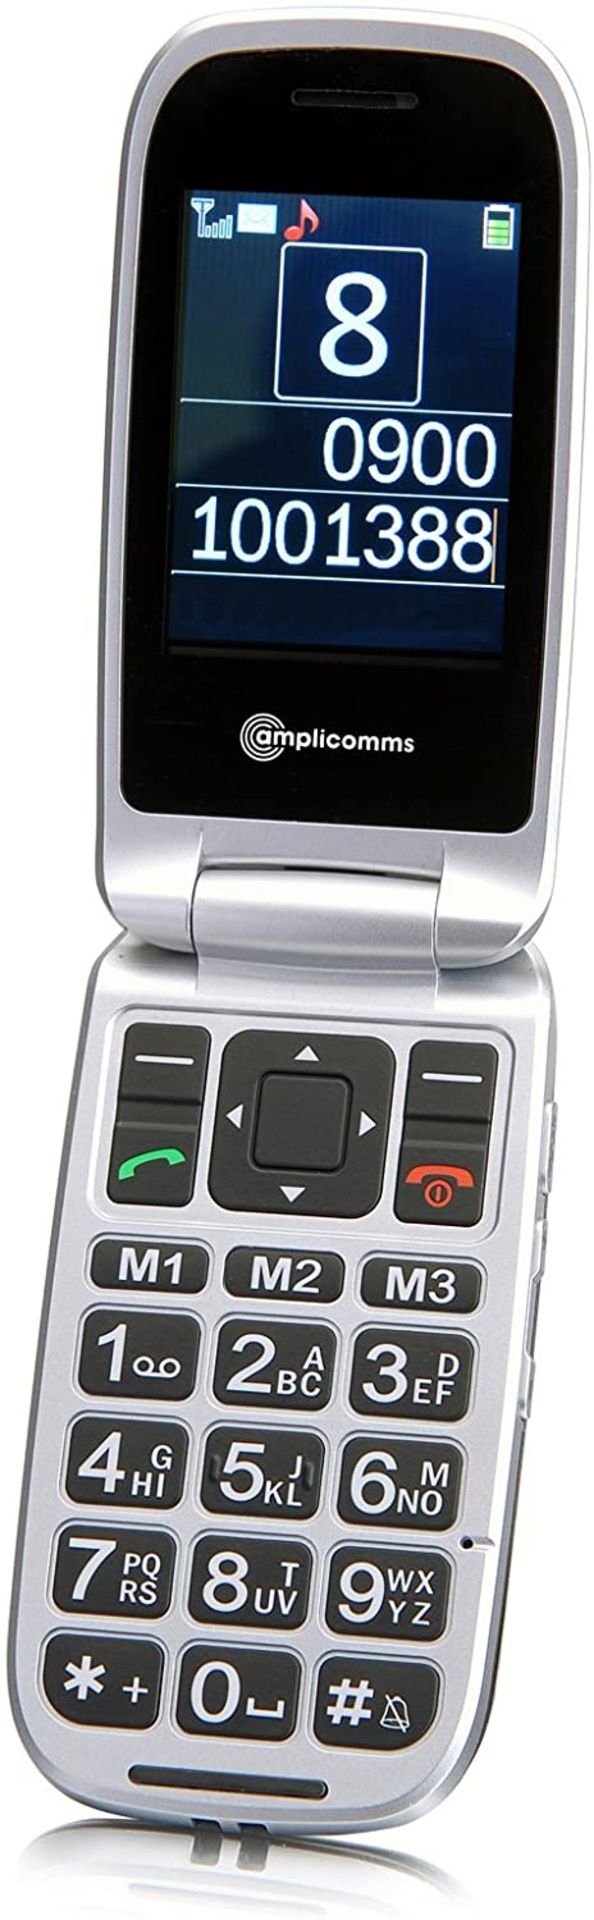 (M40) Amplicomms PowerTel M7500 Silver Amplified Mobile Phone Easy to use with large illuminate... - Image 3 of 3